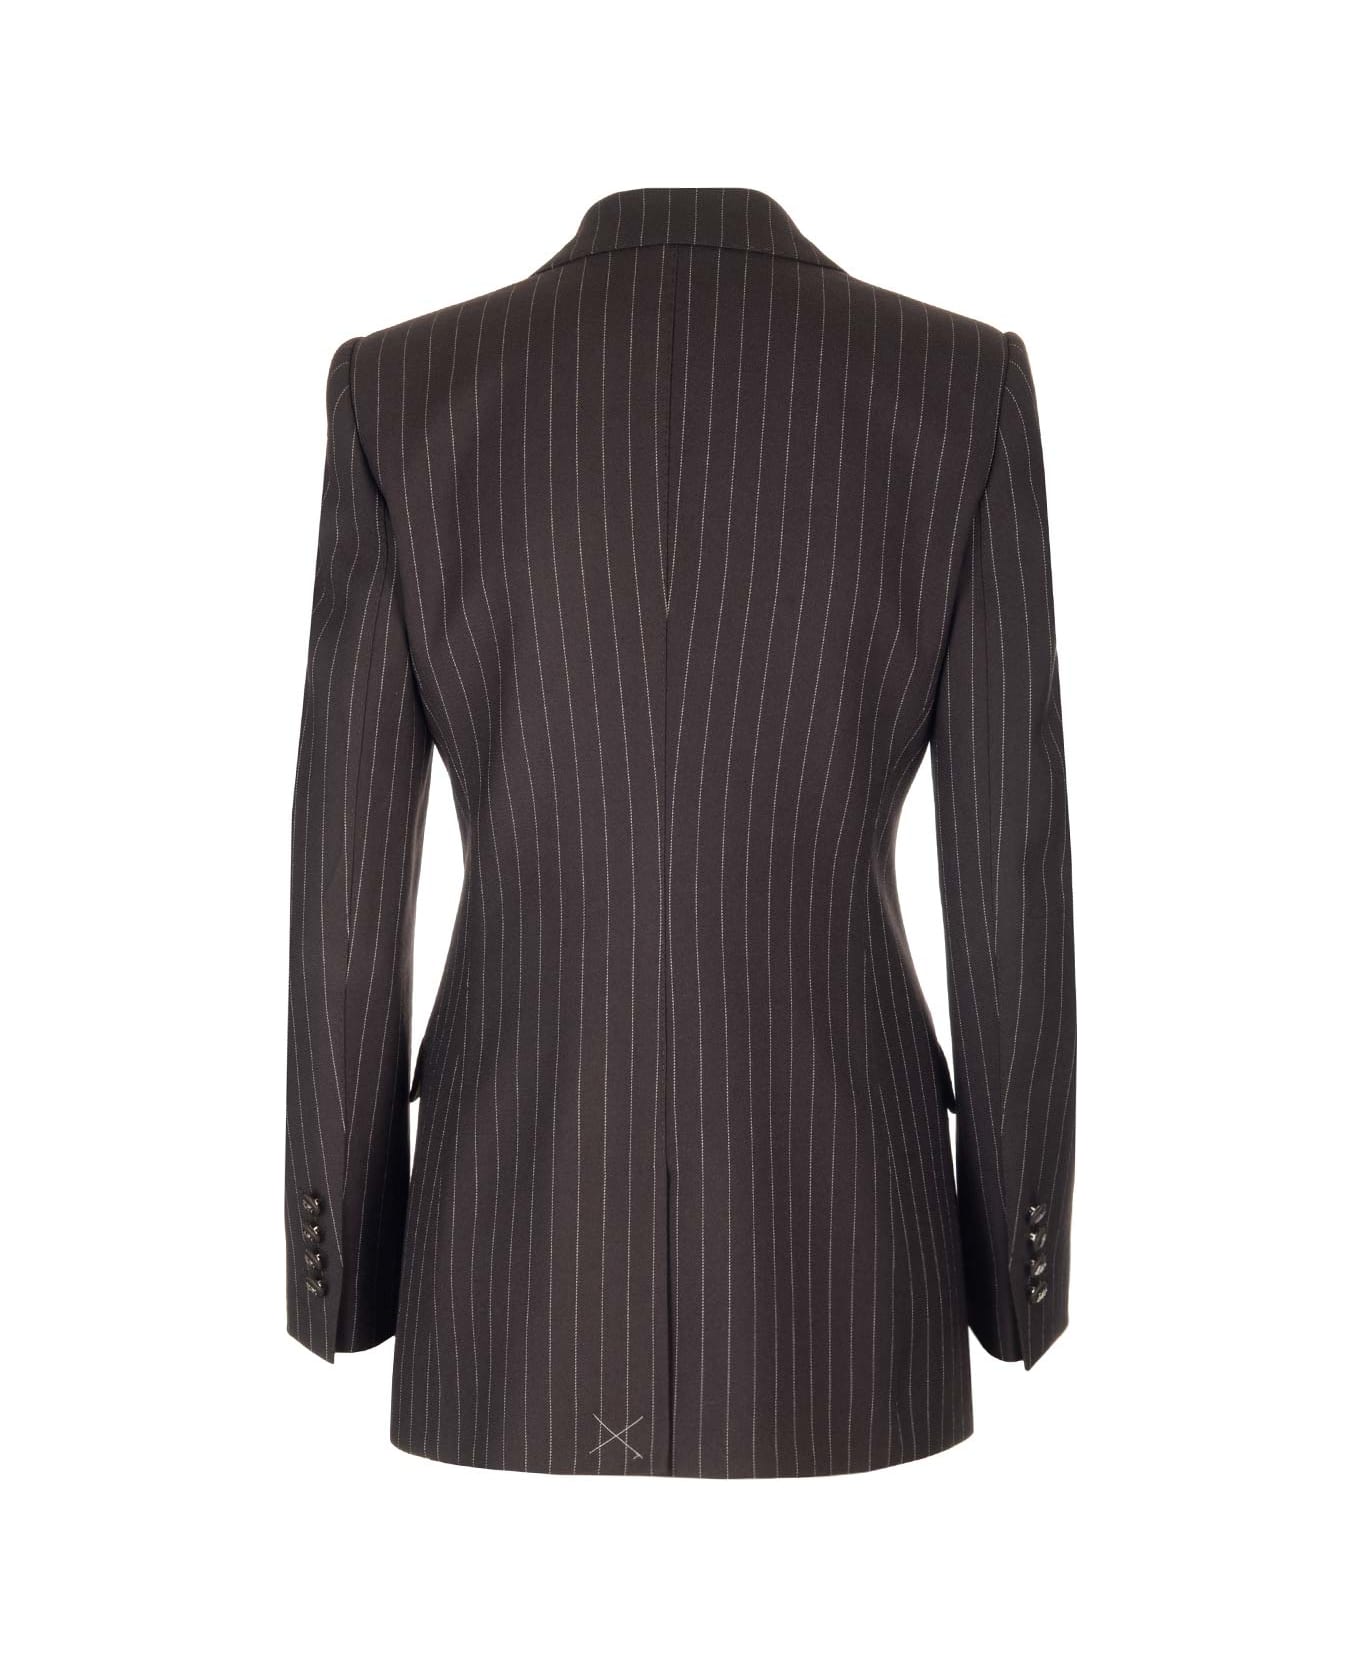 Dolce & Gabbana Double-breasted Blazer - BROWN